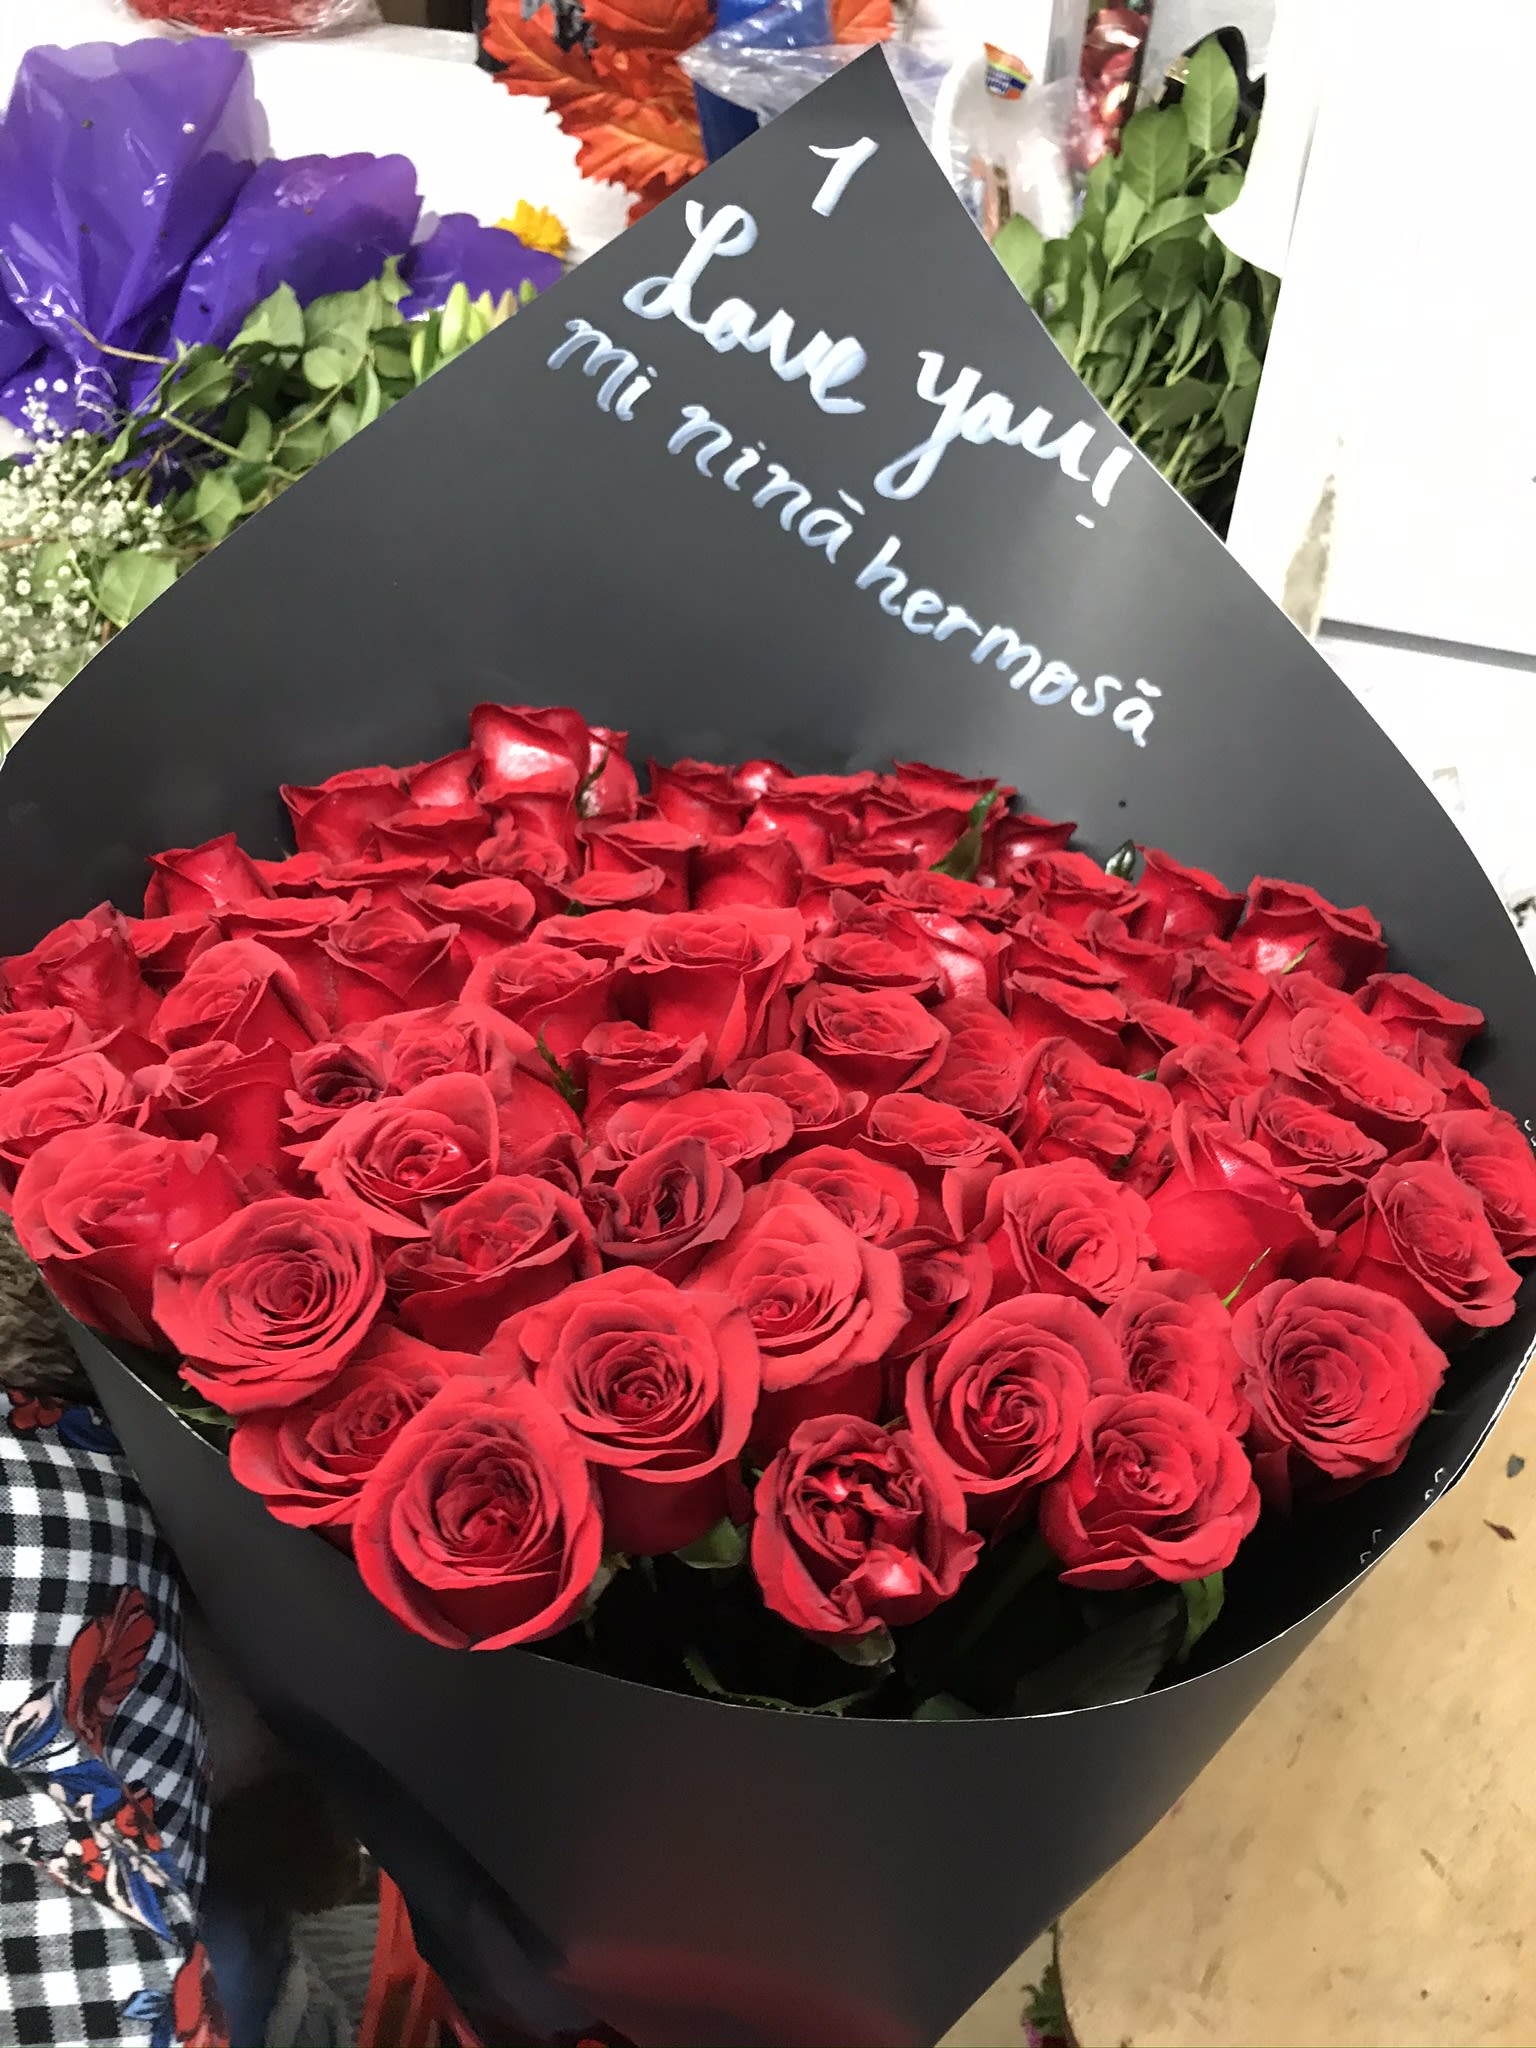 50 RED ROSES BOUQUET in San Pedro, CA | San Pedro Flowers